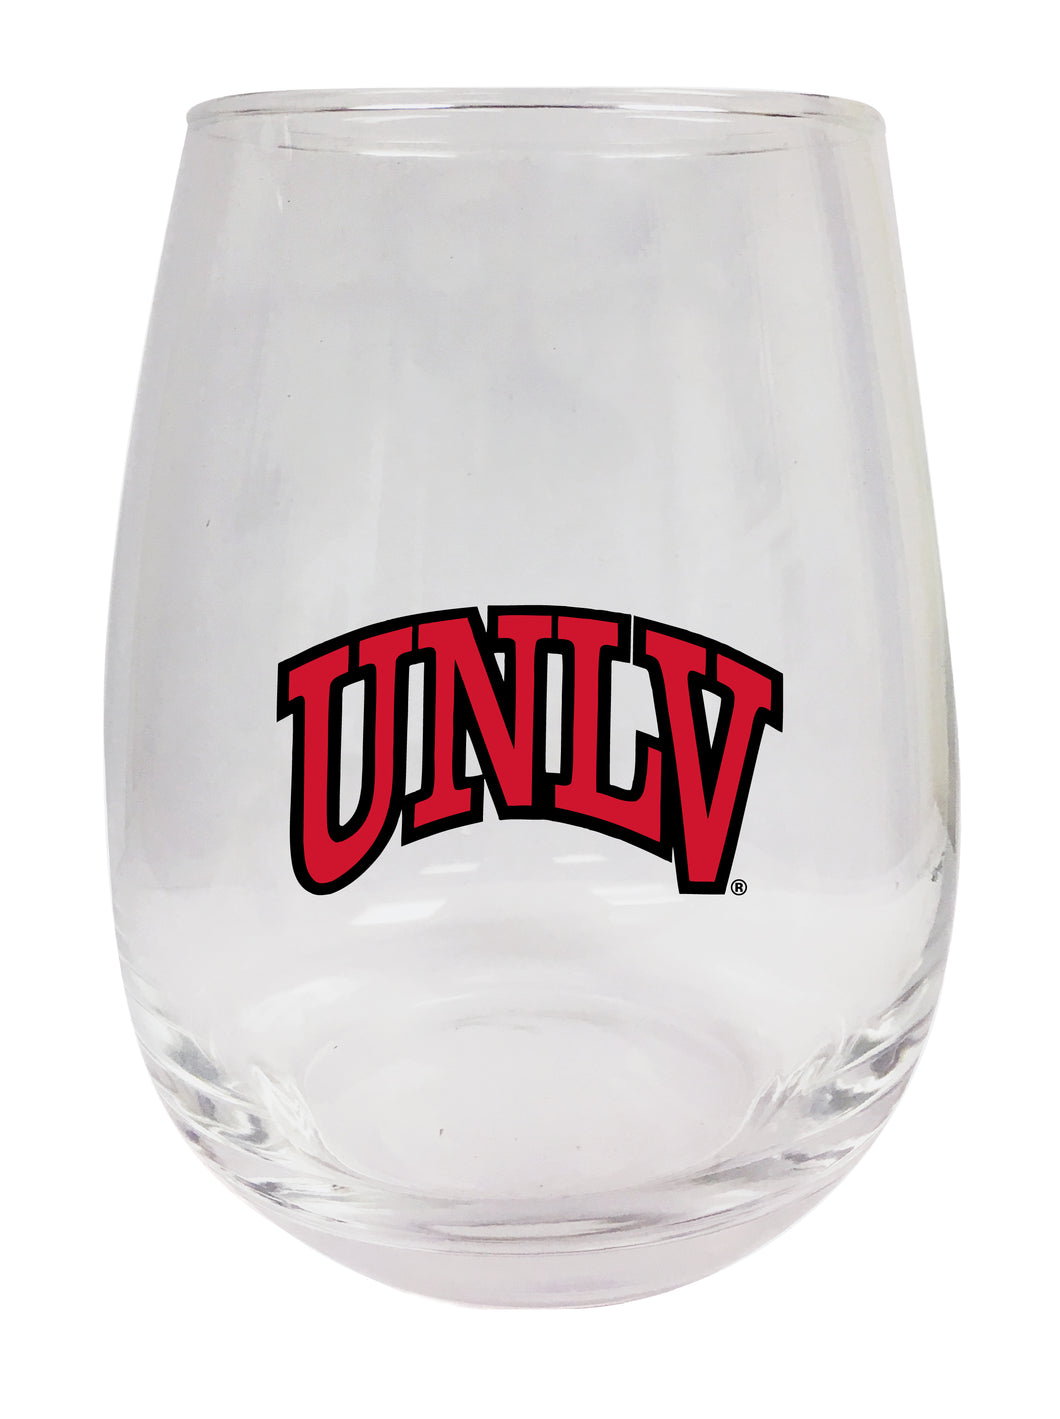 UNLV Rebels Stemless Wine Glass - 9 oz. | Officially Licensed NCAA Merchandise